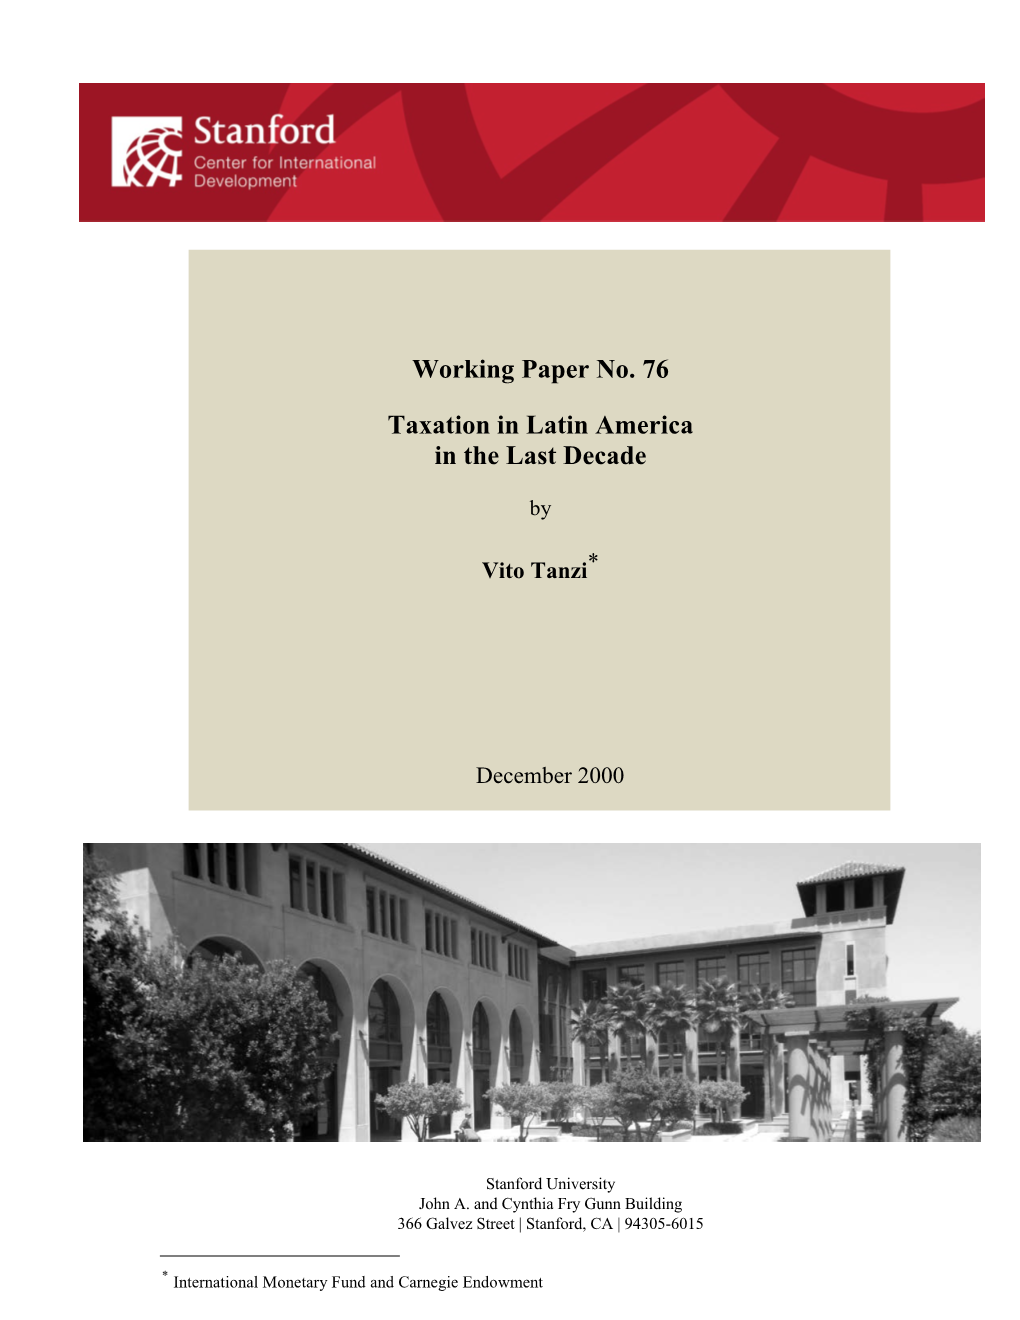 Working Paper No. 76 Taxation in Latin America in the Last Decade